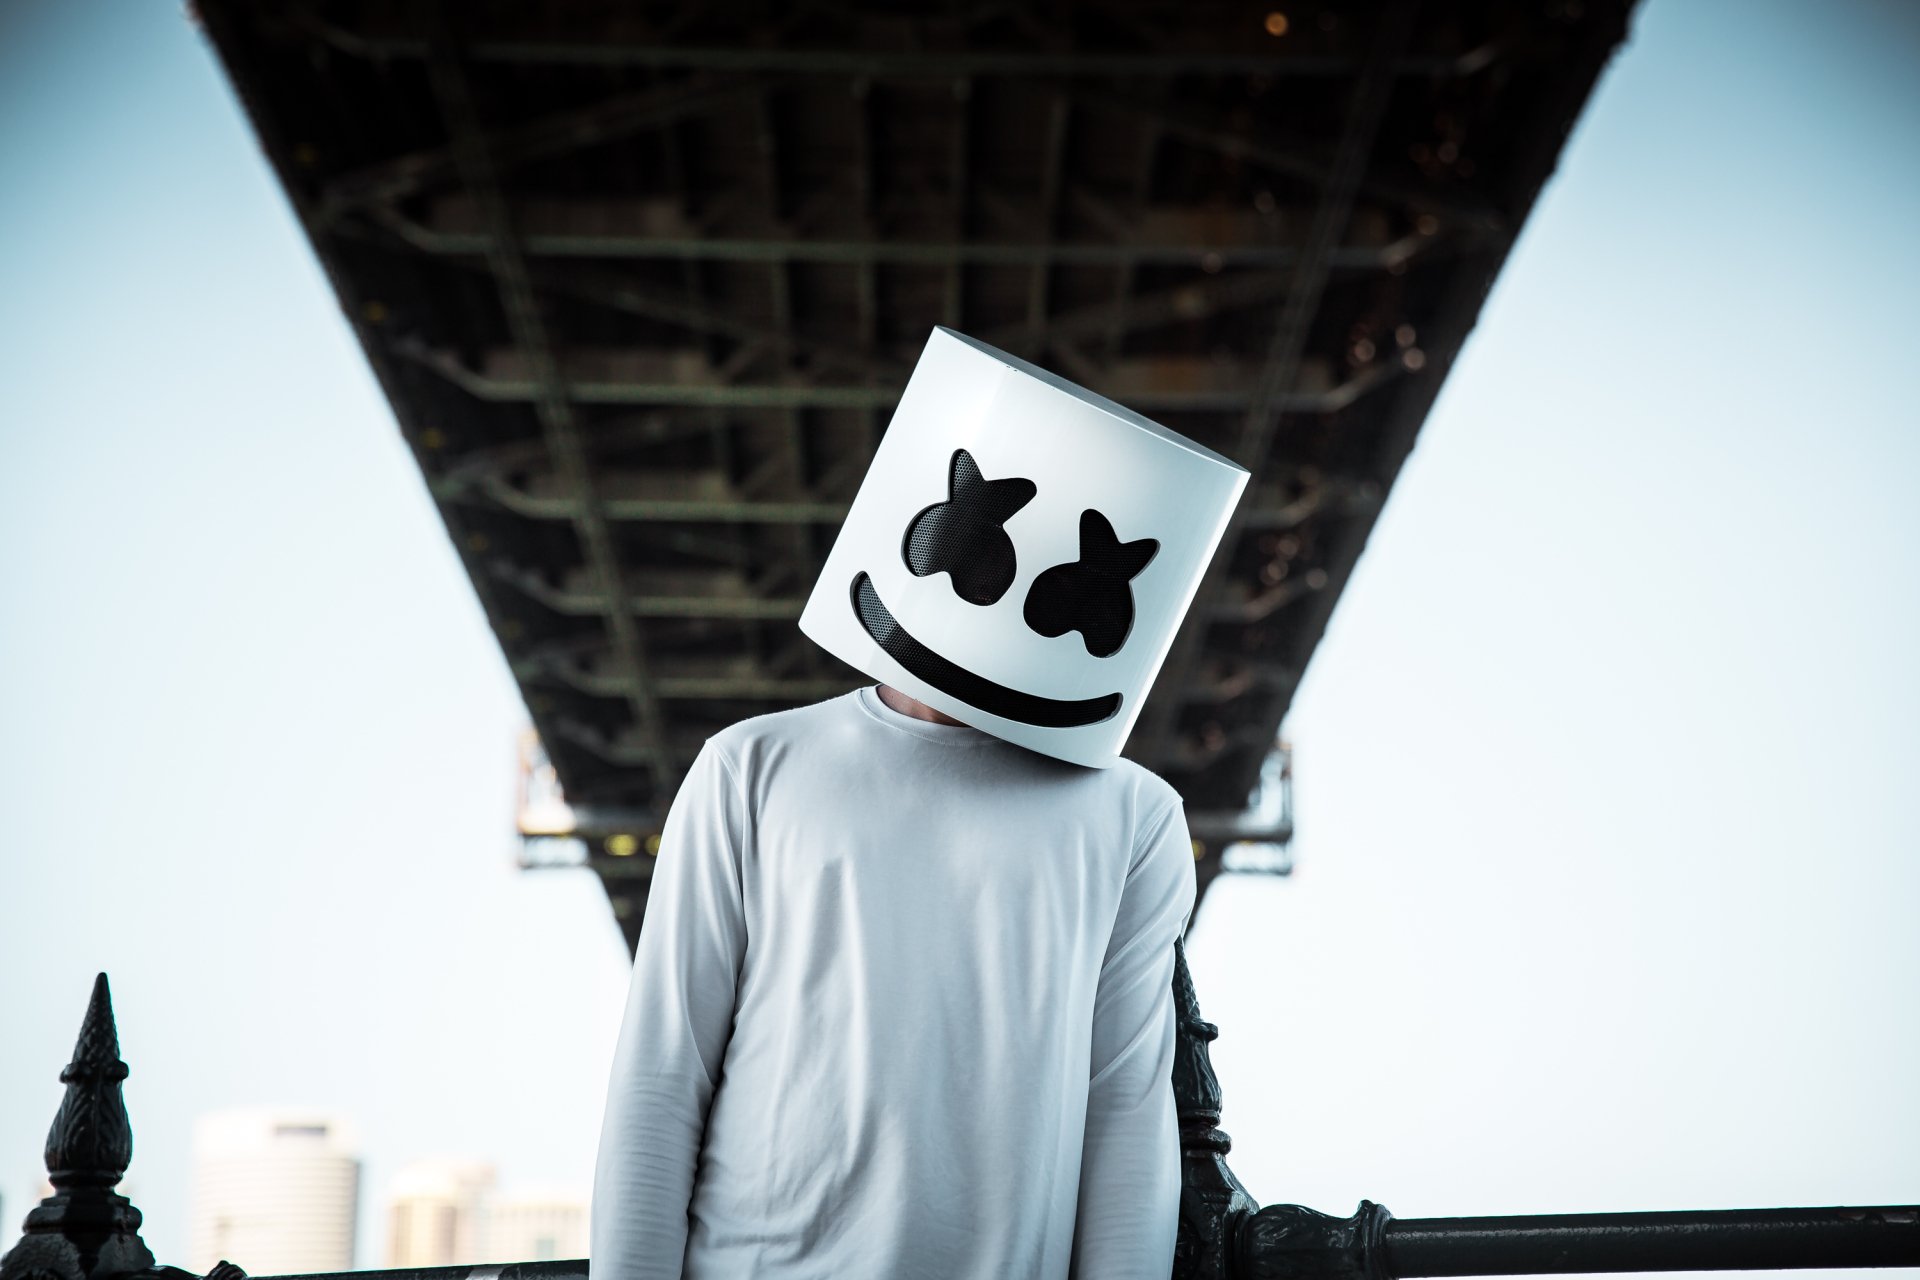 54 Marshmello Hd Wallpapers Background Images Wallpaper Abyss